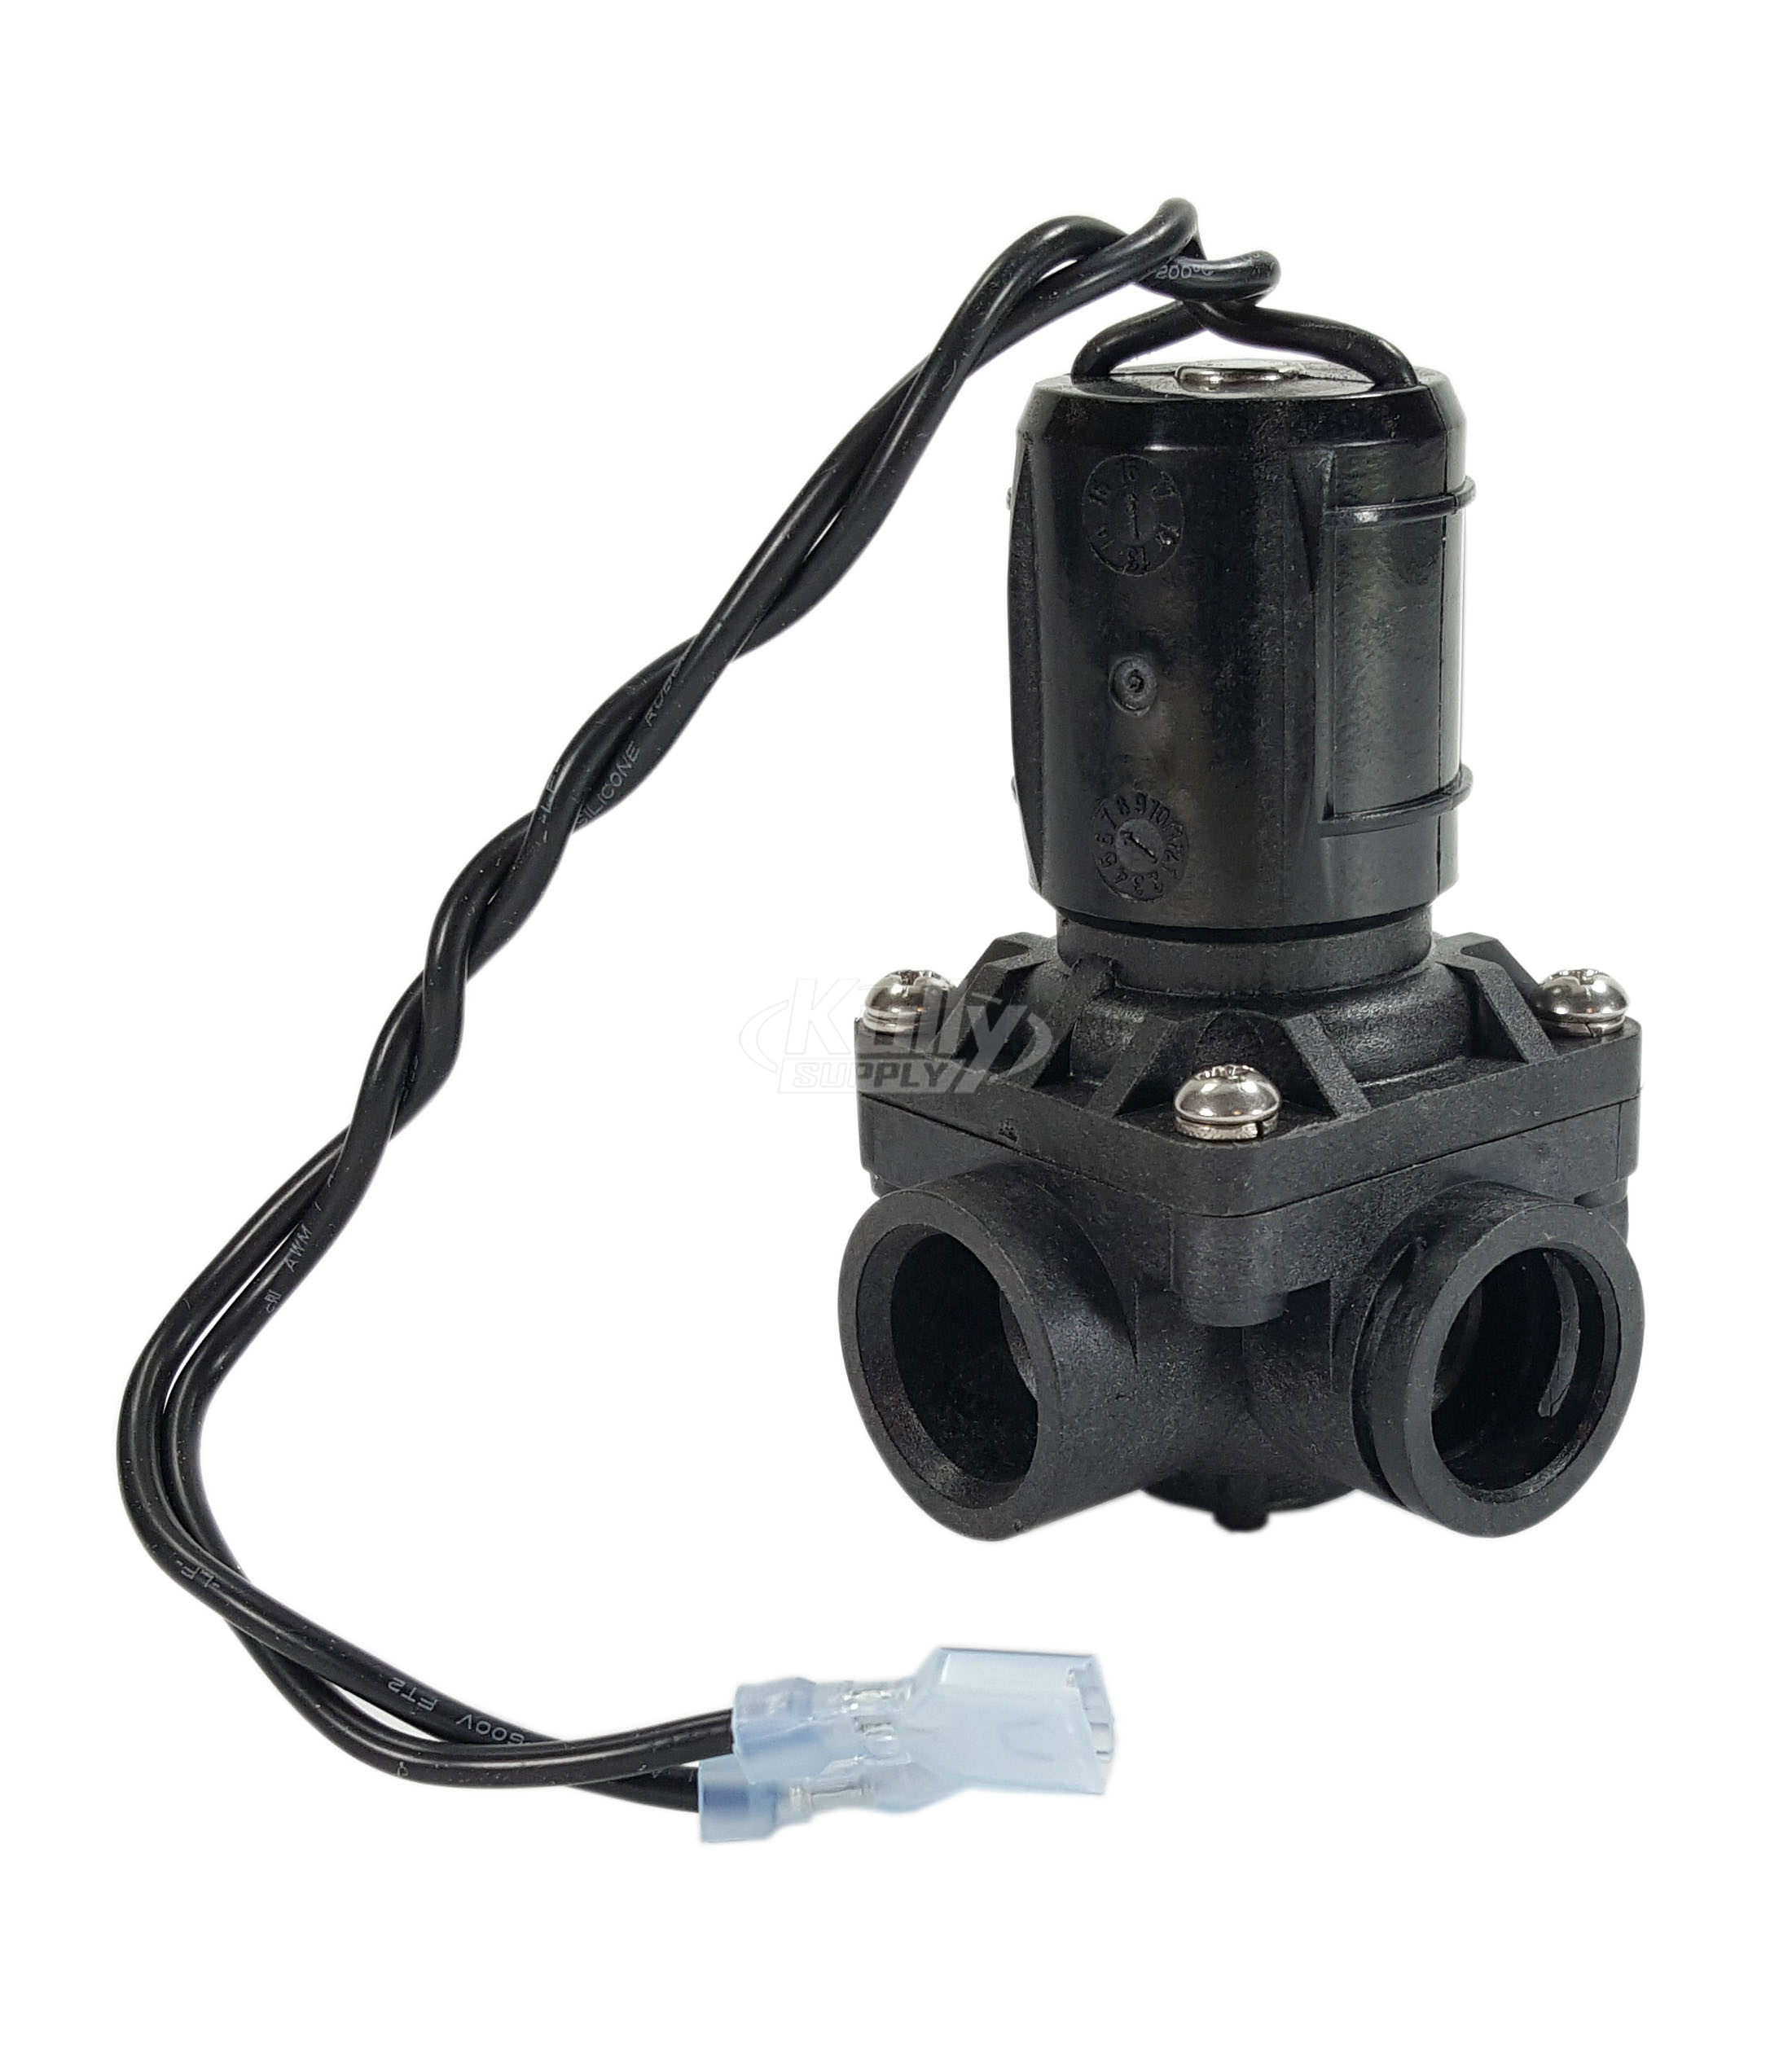 Acorn 2570-117-001 24 VAC Solenoid Operated Left Hand Valve Assembly